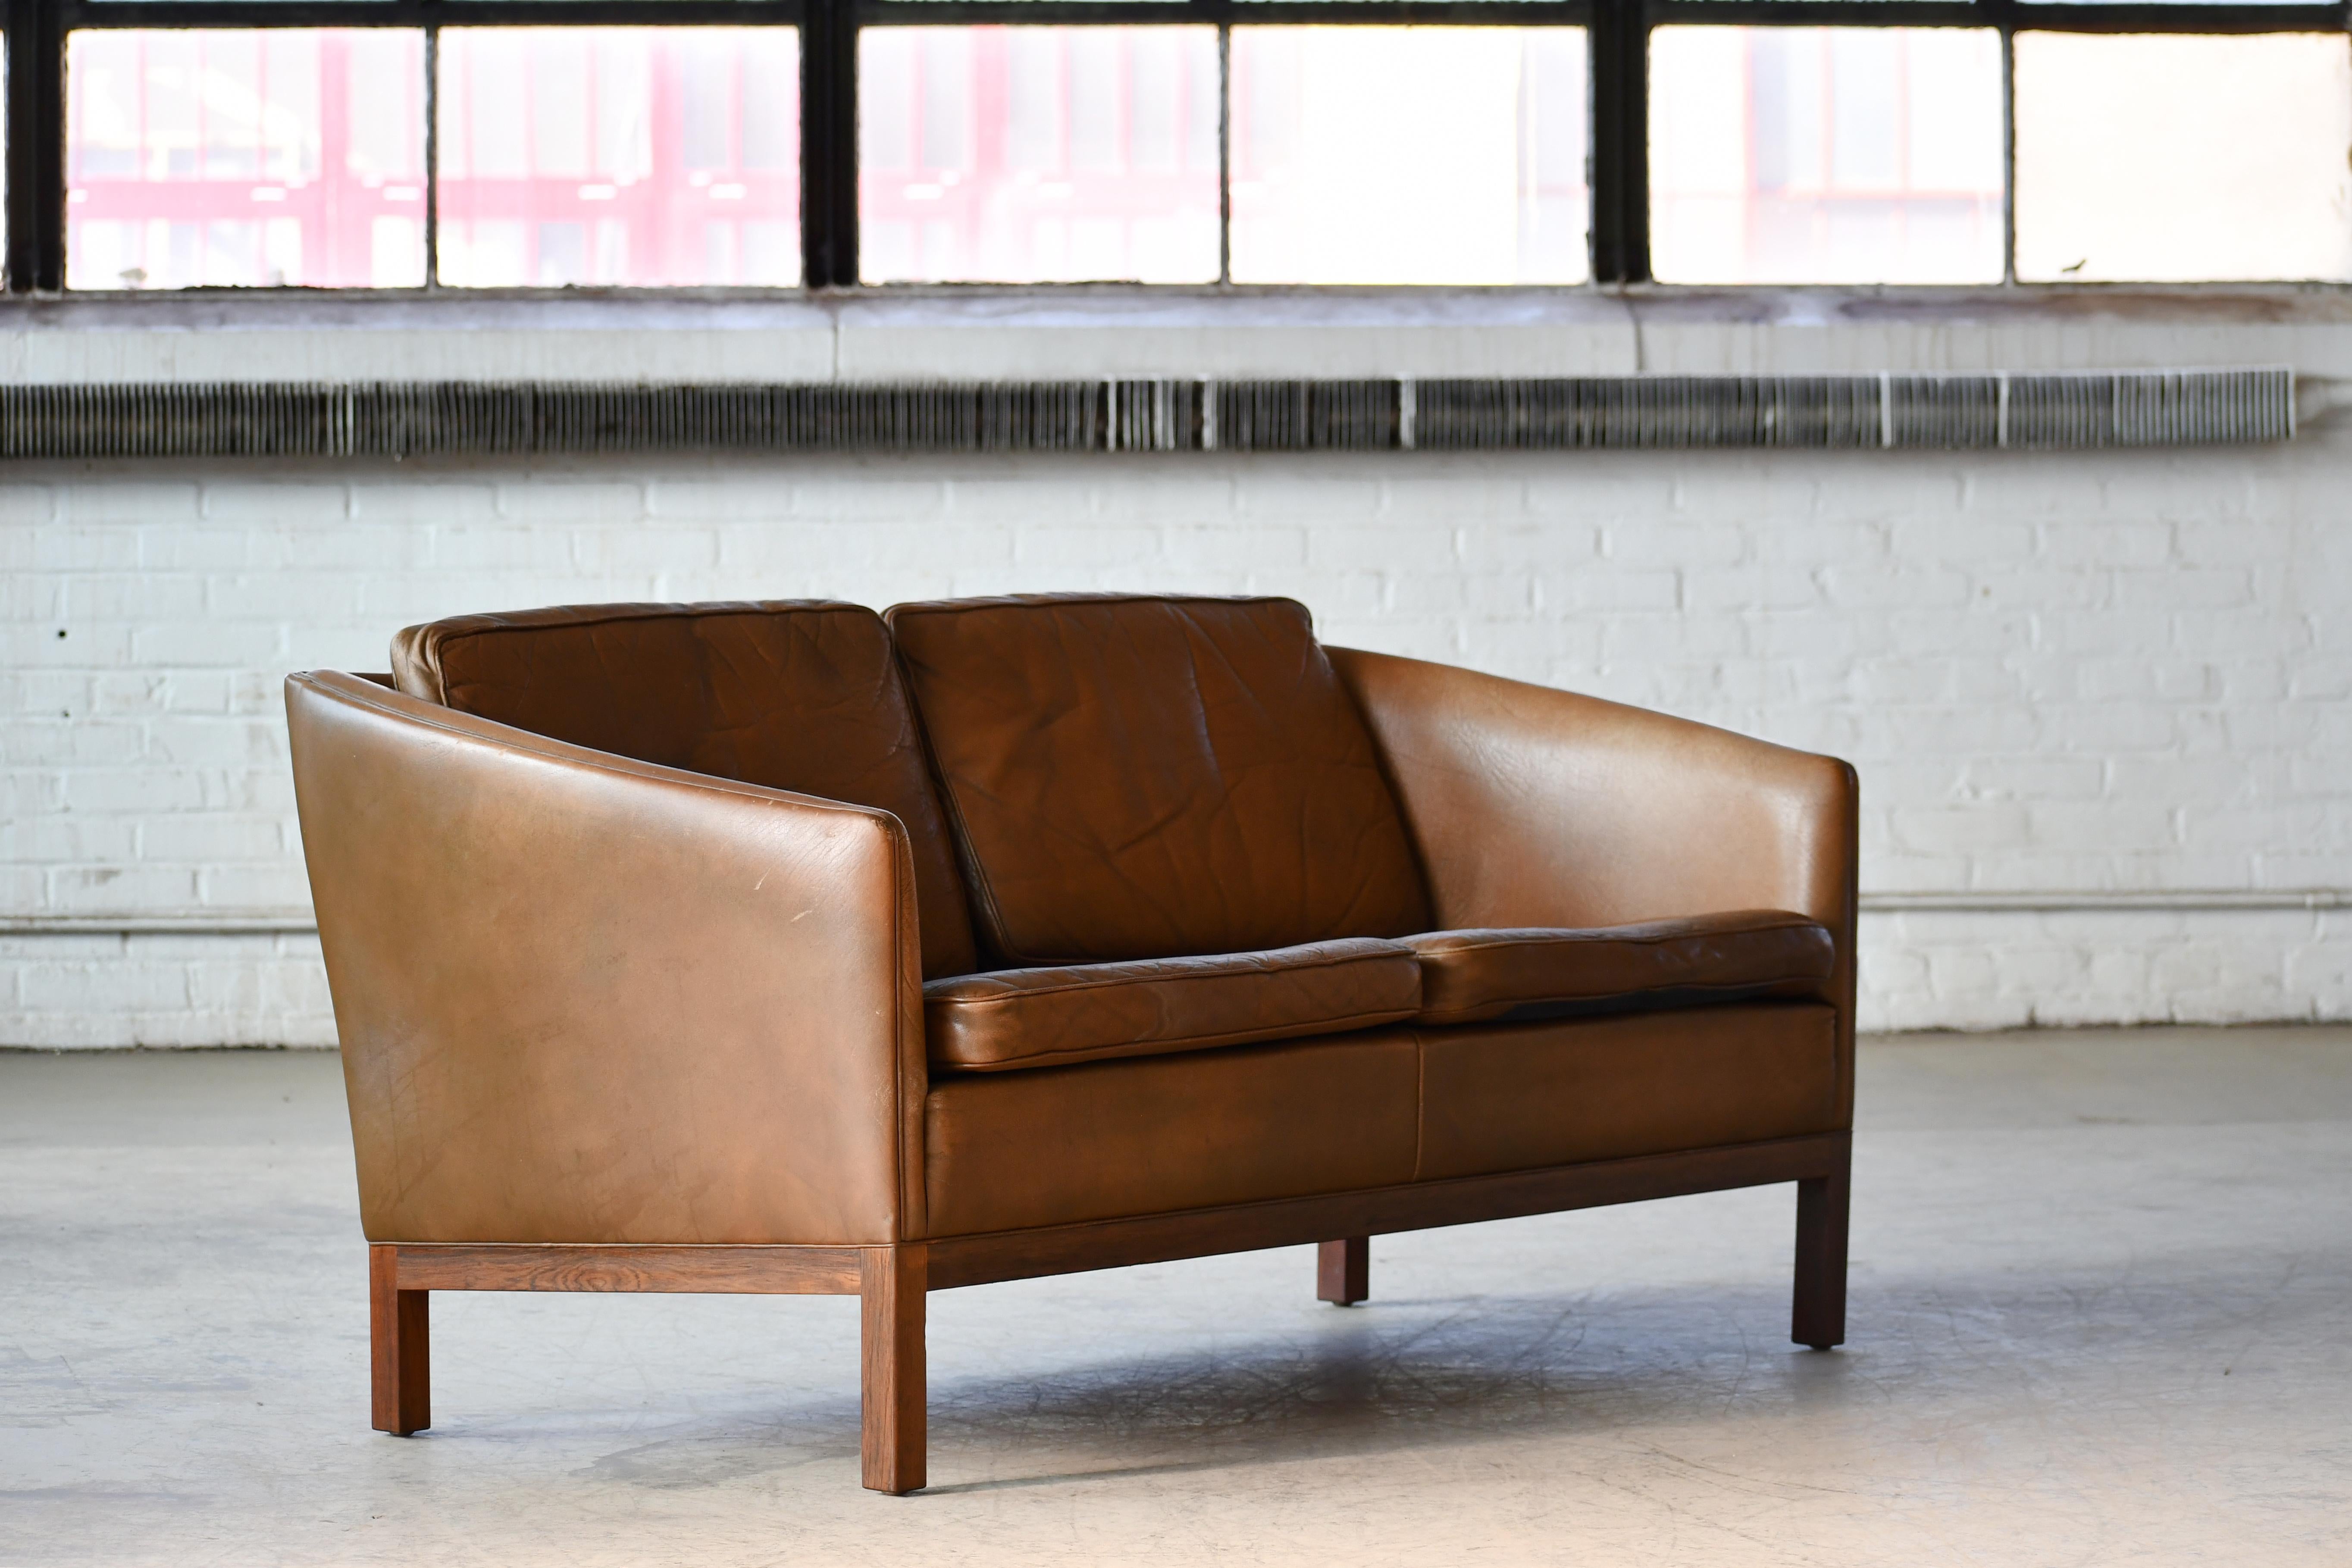 Mid-20th Century Loveseat by Illum Wikkelso in Cognac Leather and Rosewood Denmark 1960's For Sale